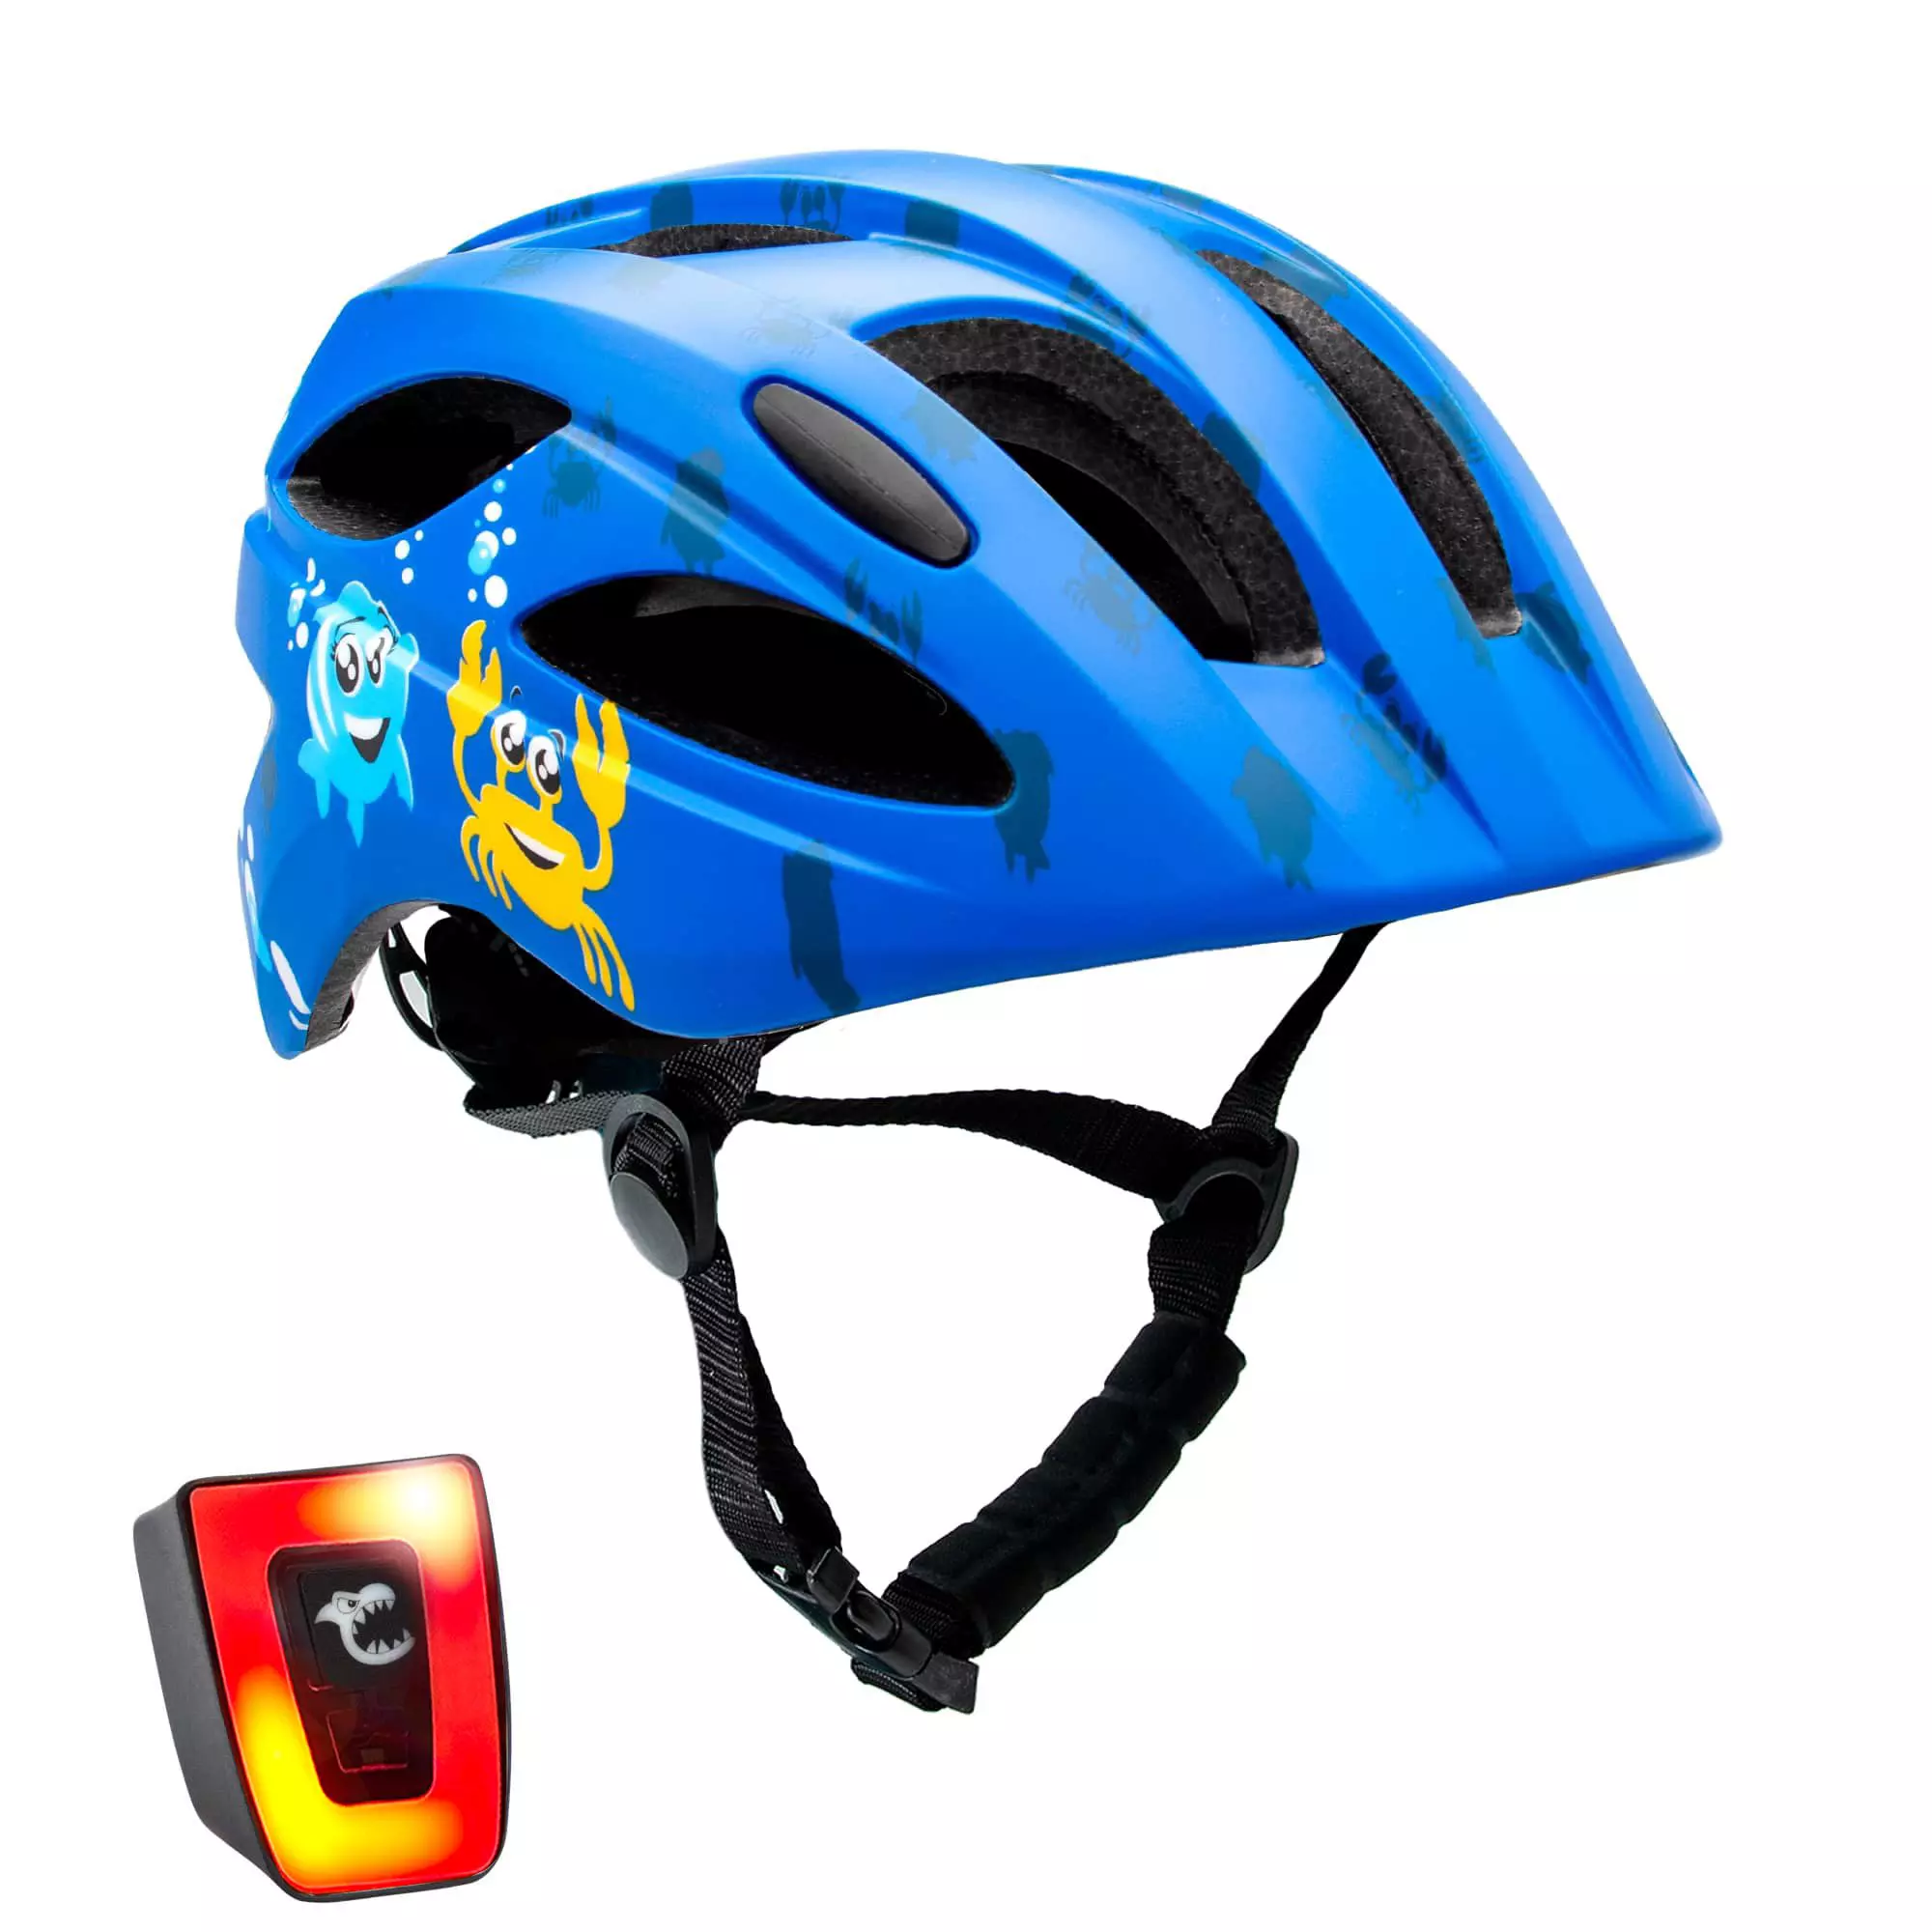 Crazy Safety Sea Bicycle Helmet Blue